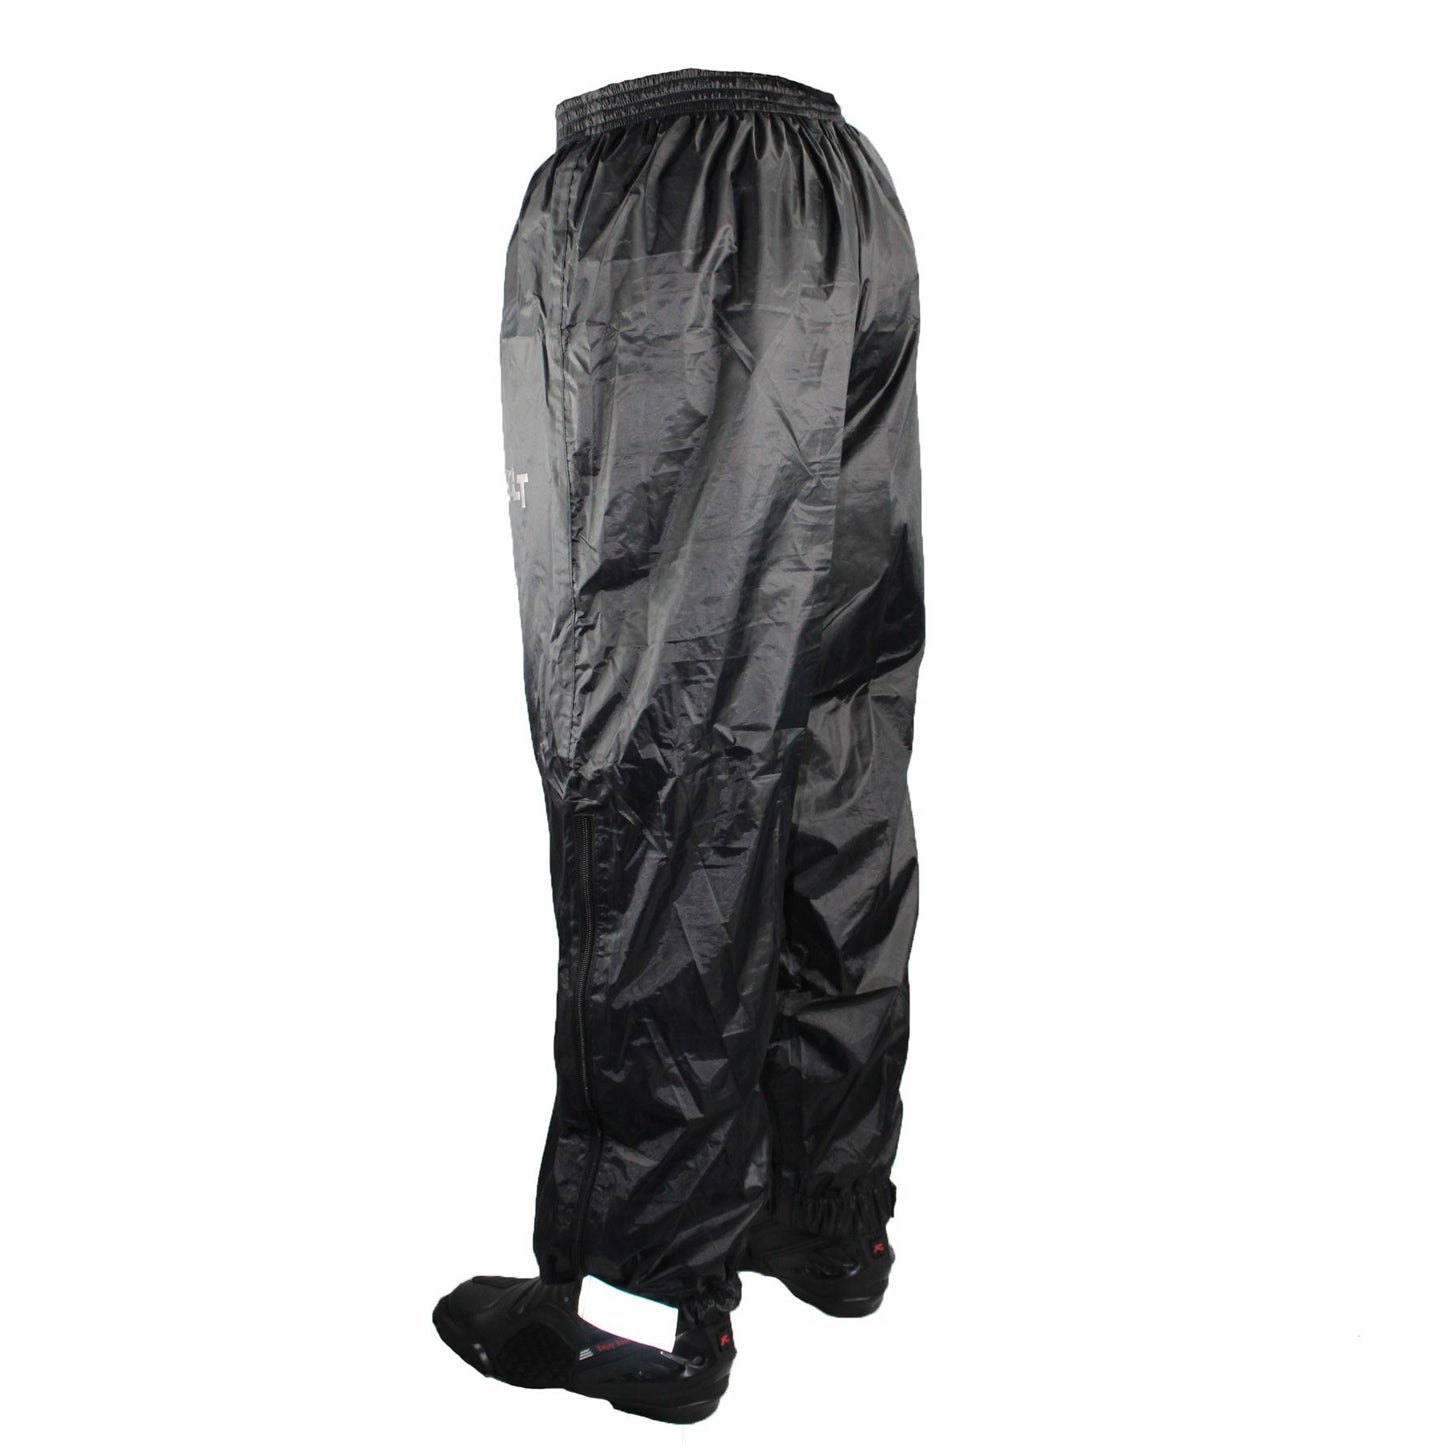 BOLT WATERPROOF OVER TROUSERS - BLACK